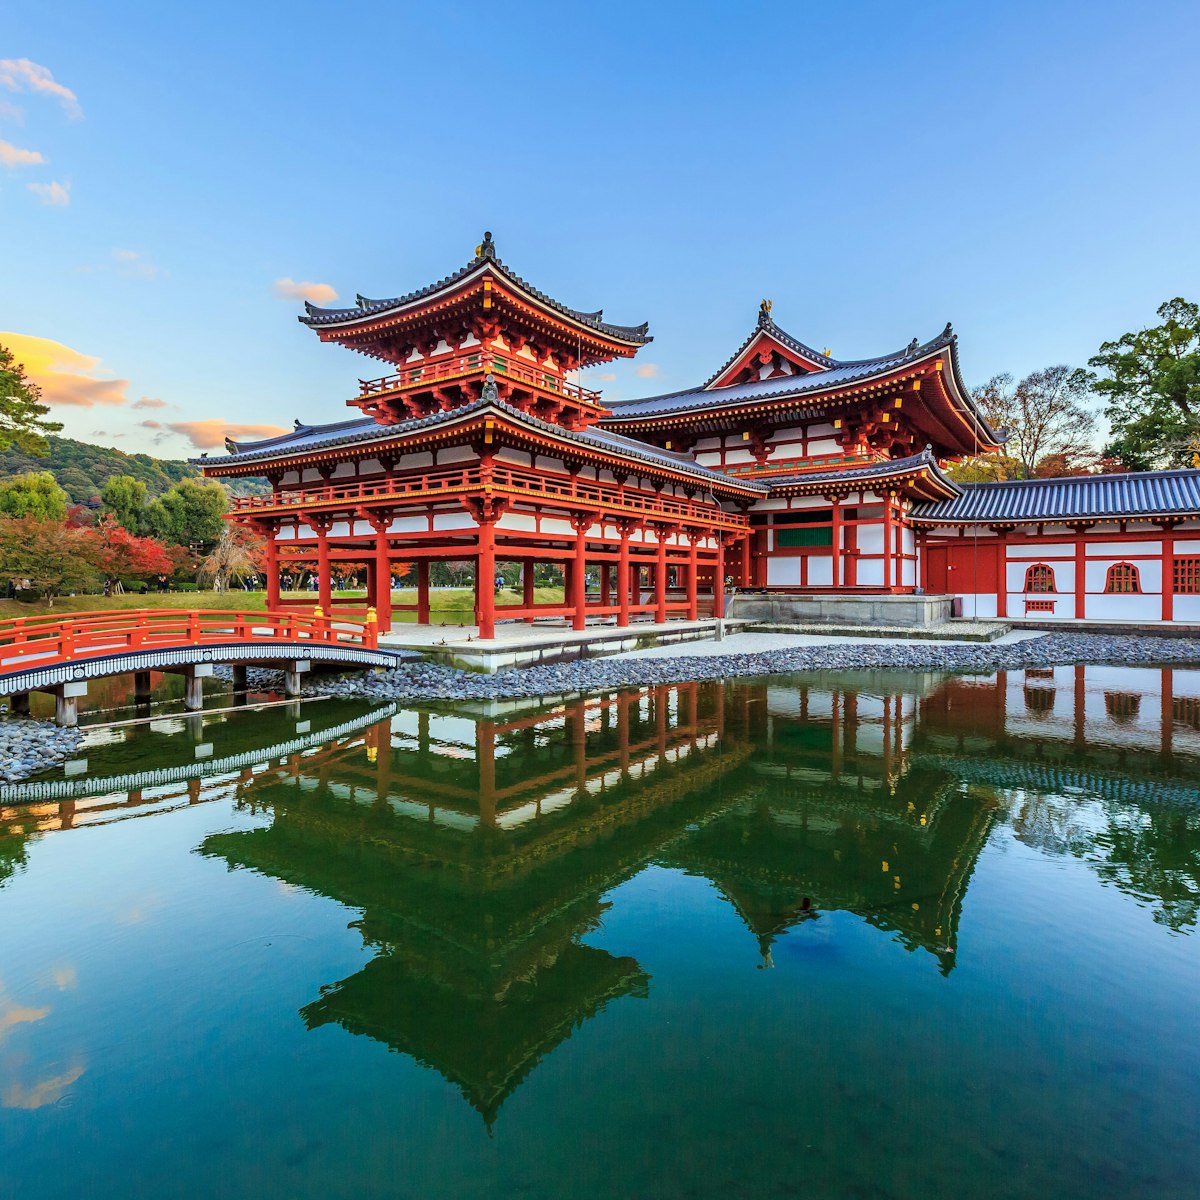 Byodo-In or Byodoin Temple Buddhist temple, Unesco World Heritage Site, Phoenix Hall building, Uji, Kyoto, Japan.; Shutterstock ID 763950445; your: Bridget Brown; gl: 65050; netsuite: Online Editorial; full: POI Image Update